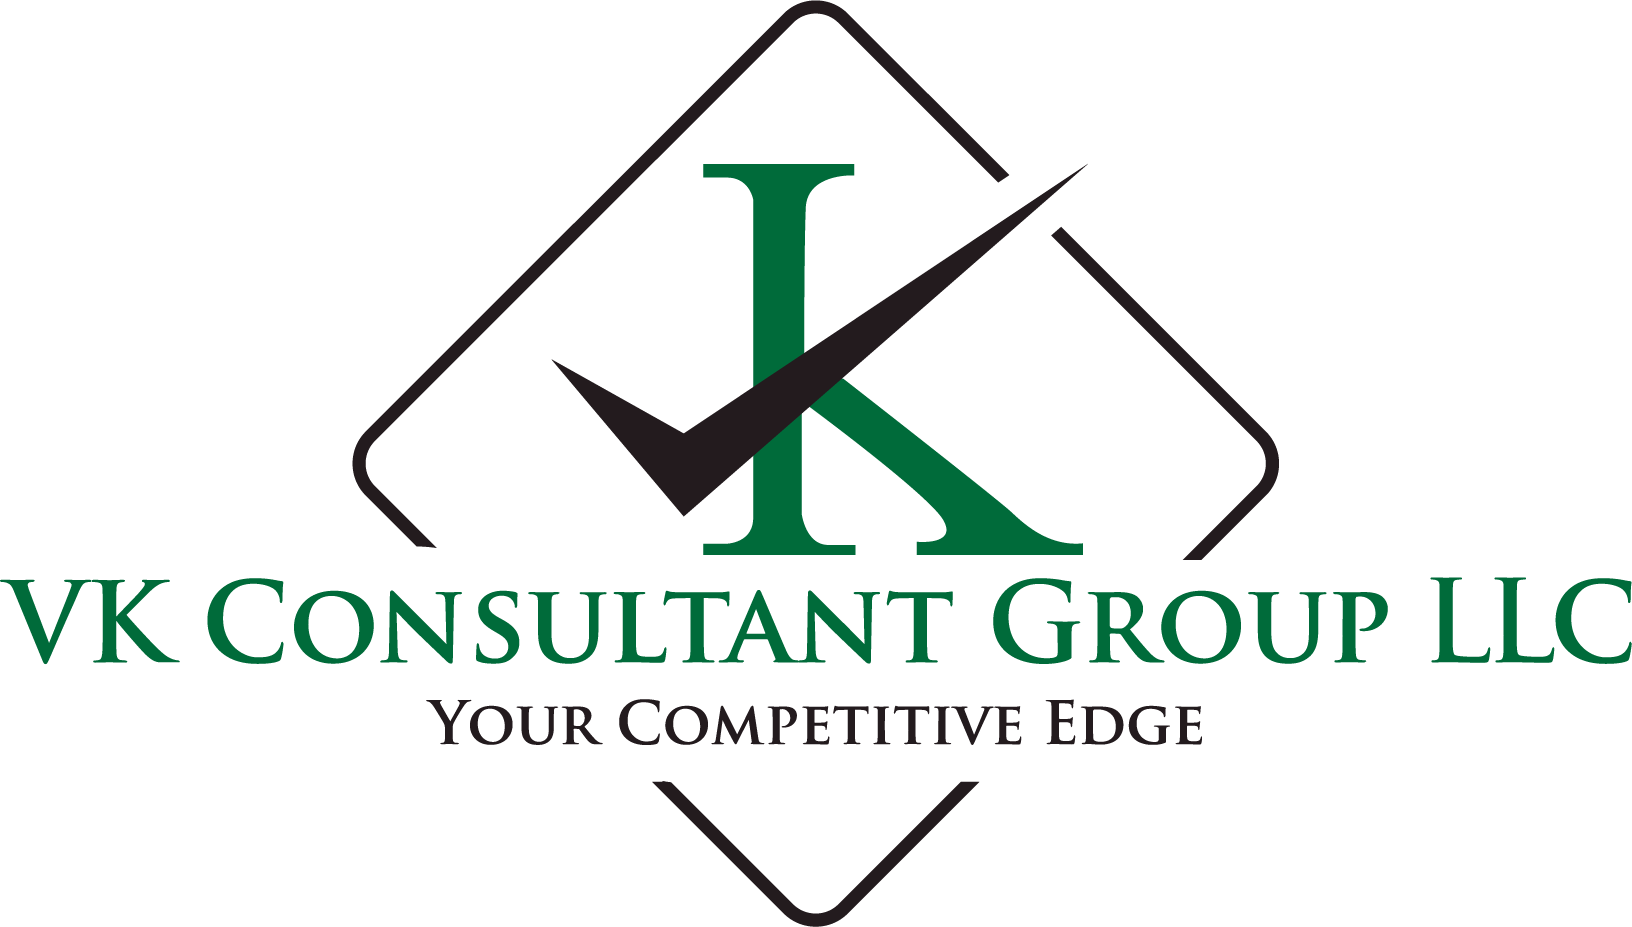 VK Consultant Group